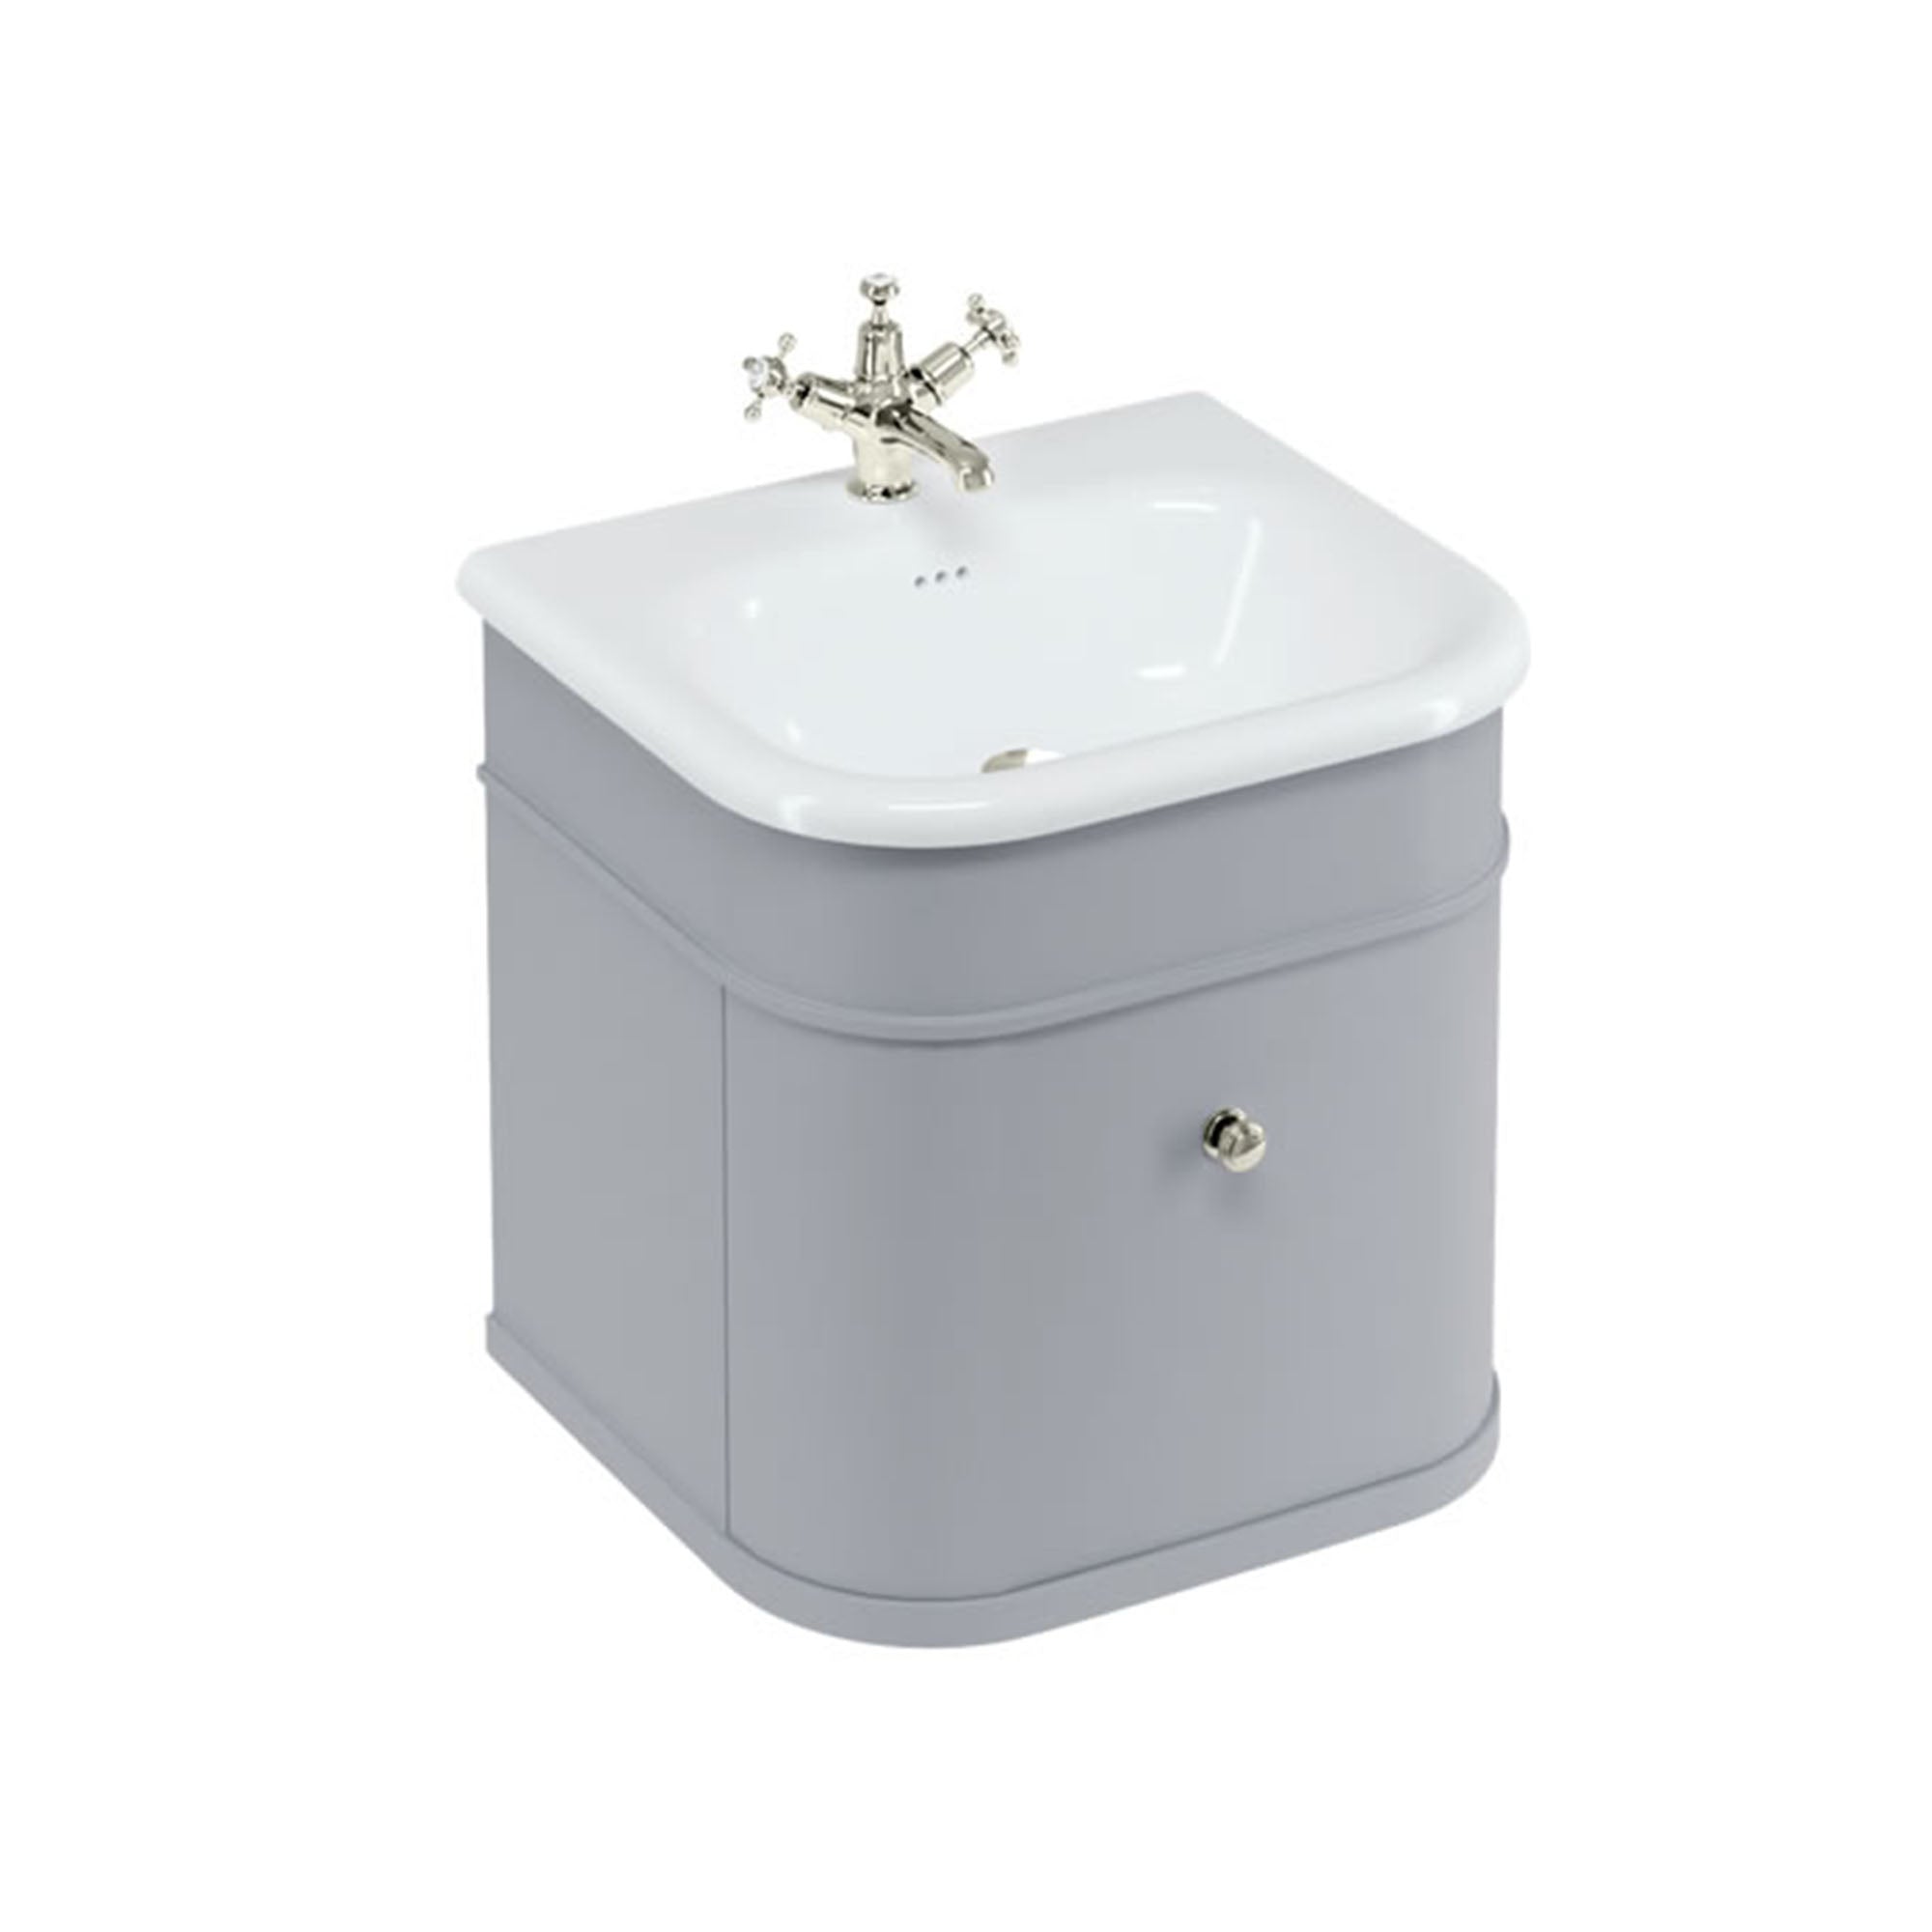 burlington chalfont 550mm wall mounted vanity with roll top basin classic grey